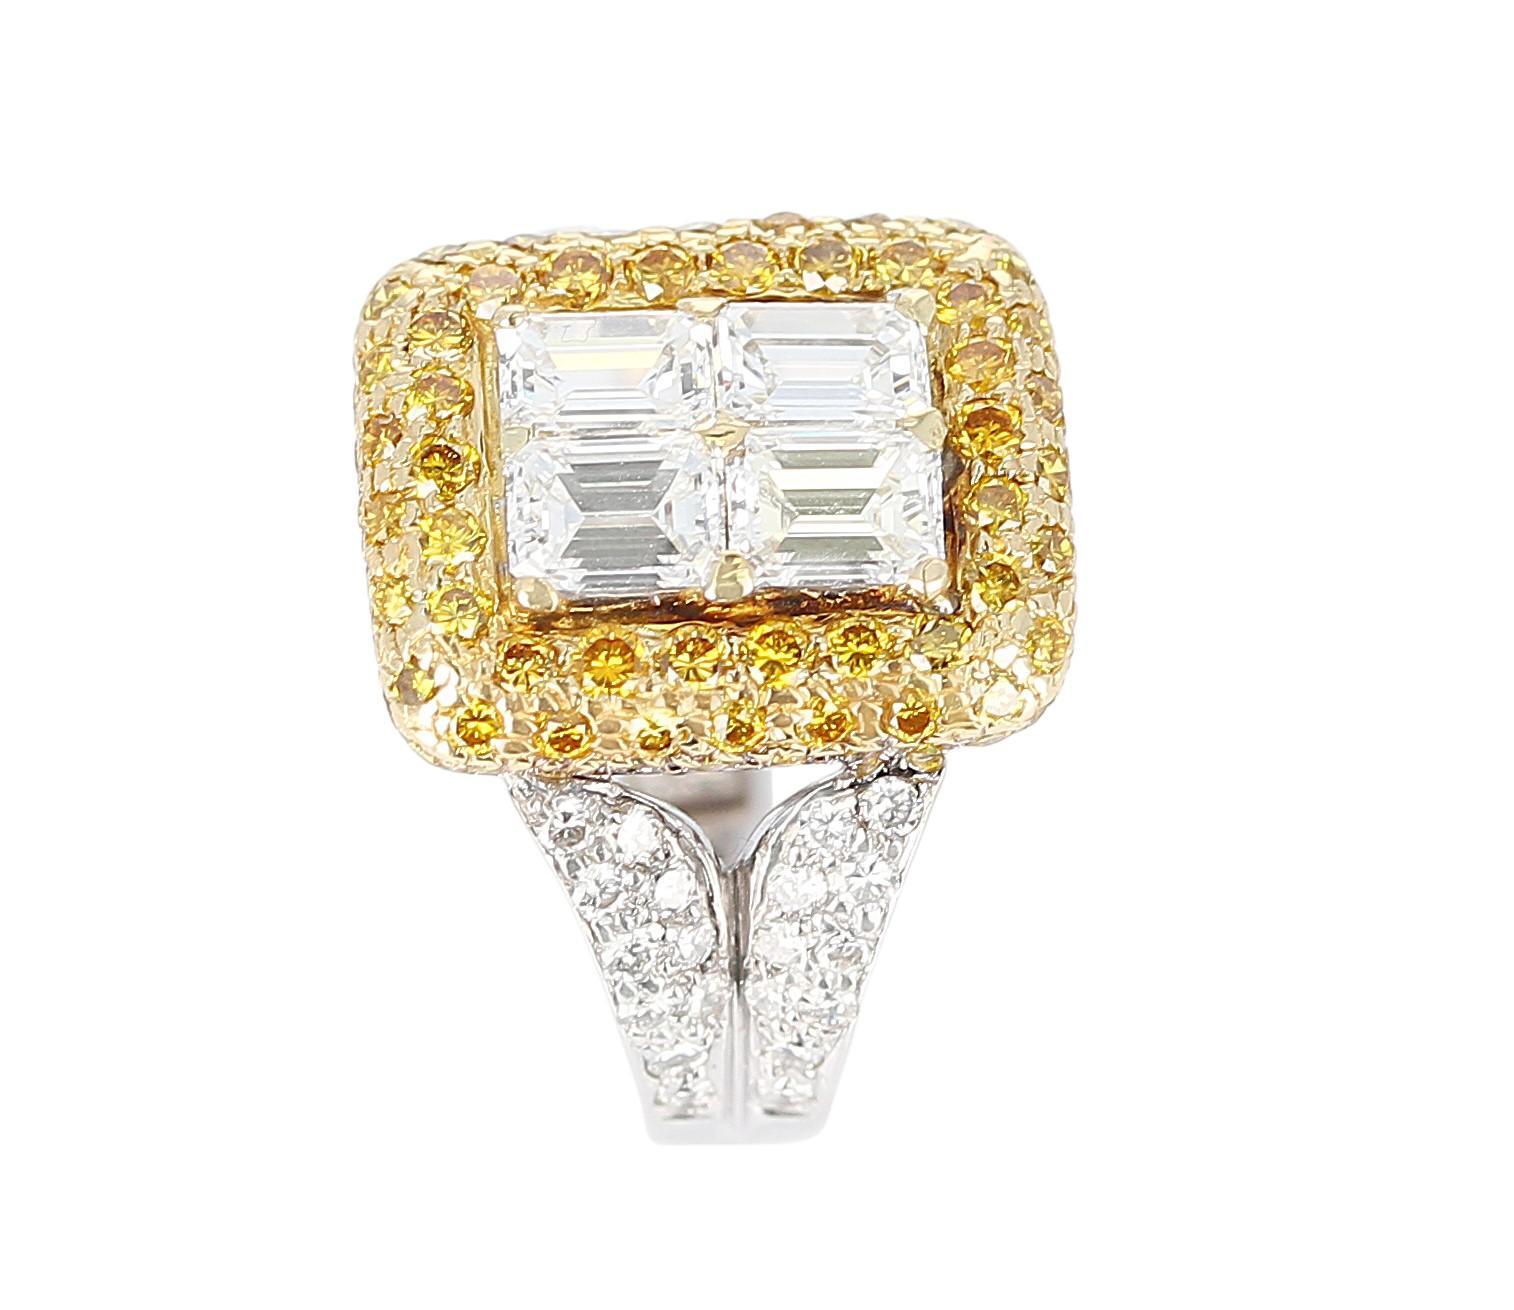 Emerald Cut Emerald-Cut Diamond Engagement Ring with Pave Yellow Diamonds and White Diamonds For Sale